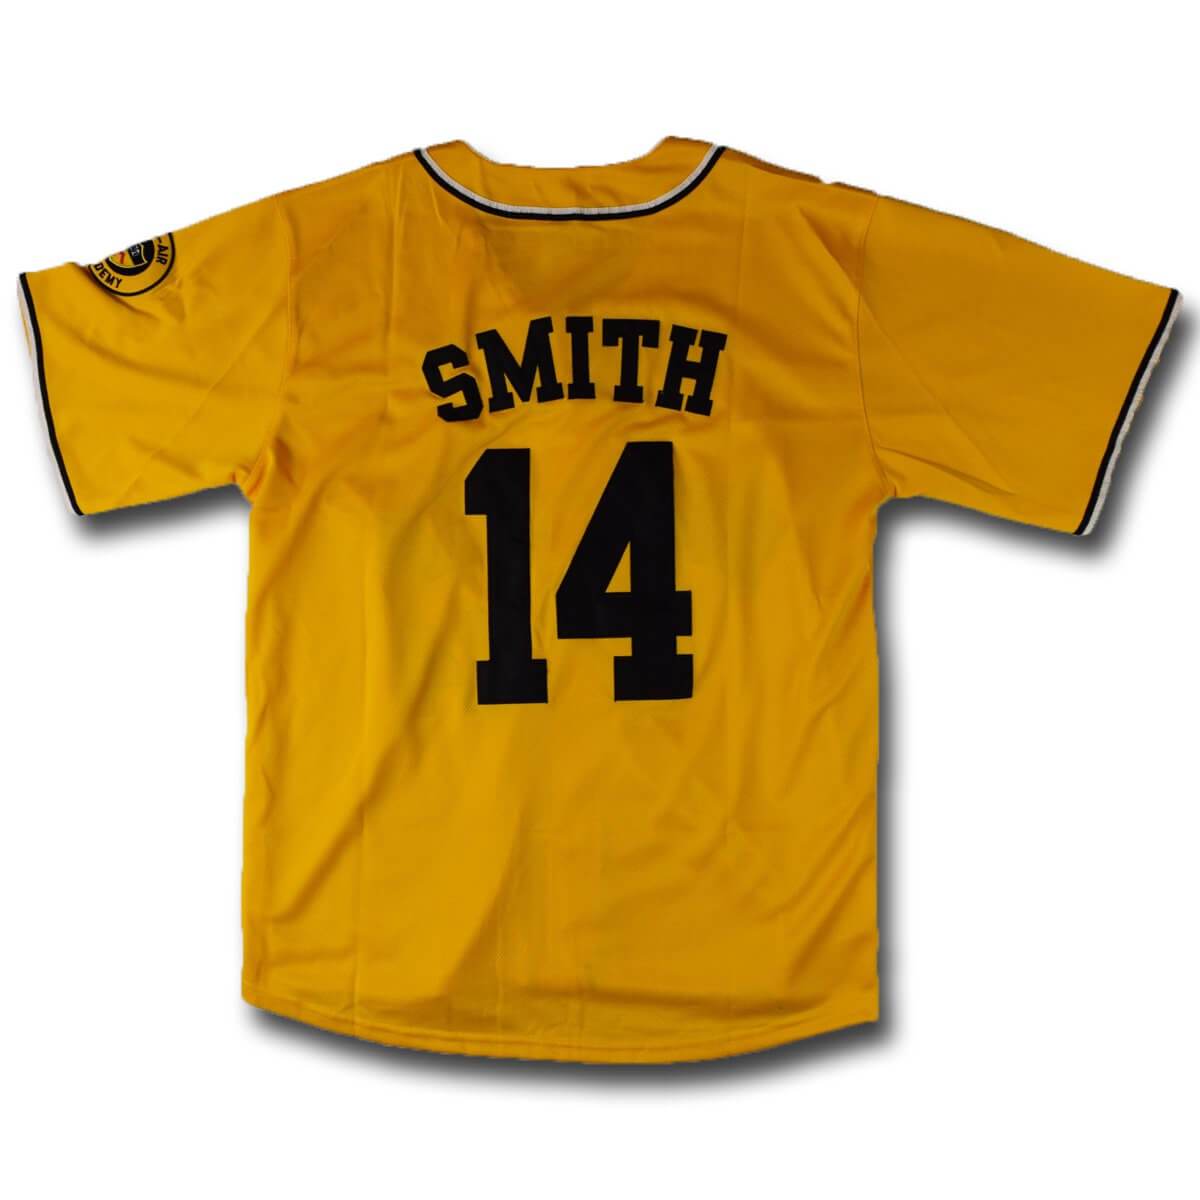 Fresh Prince of Bel Air Baseball Jersey Will Smith #14